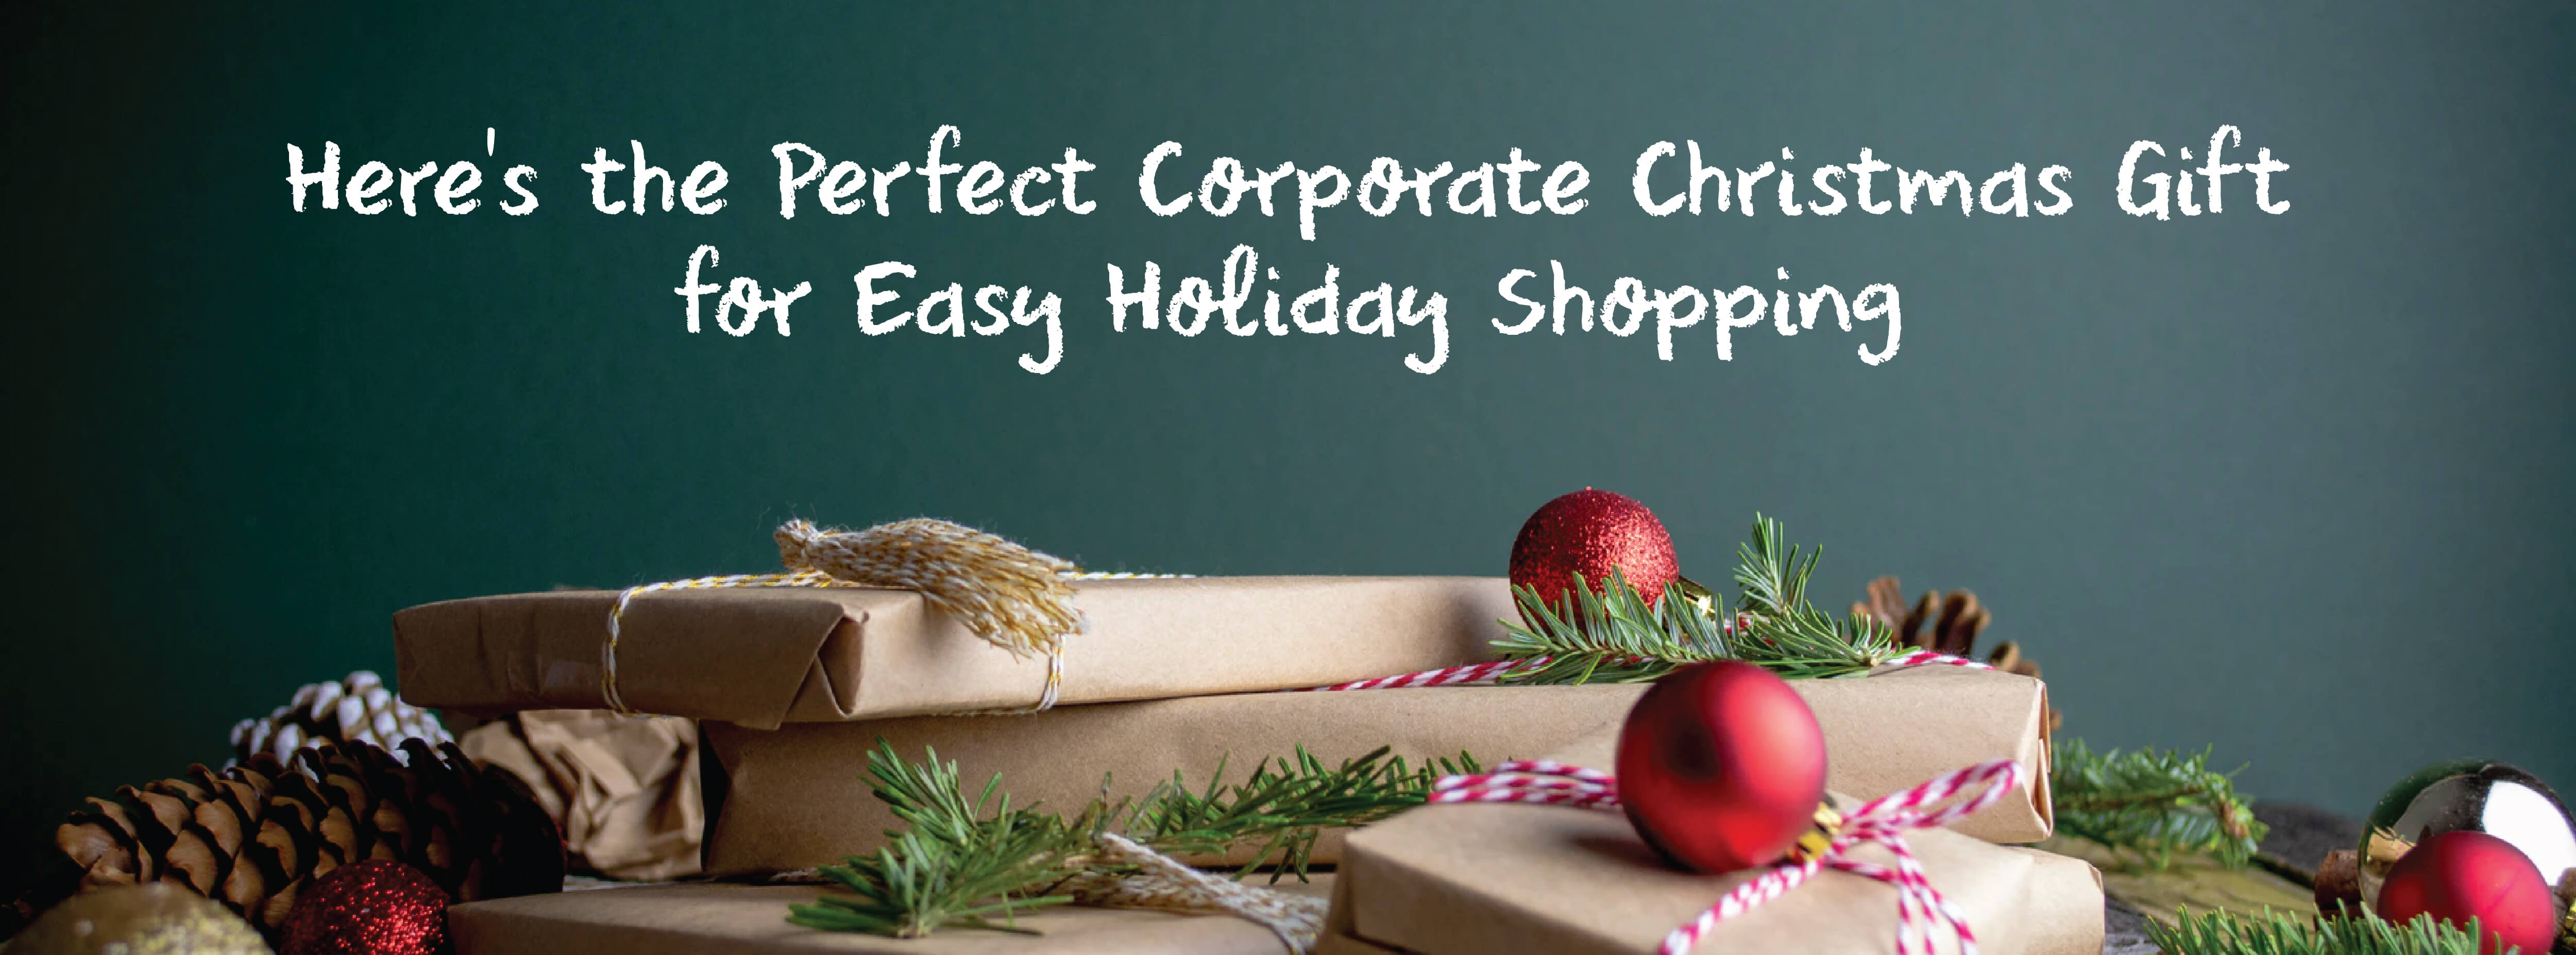 Here’s the Perfect Corporate Christmas Gift for Easy Holiday Shopping